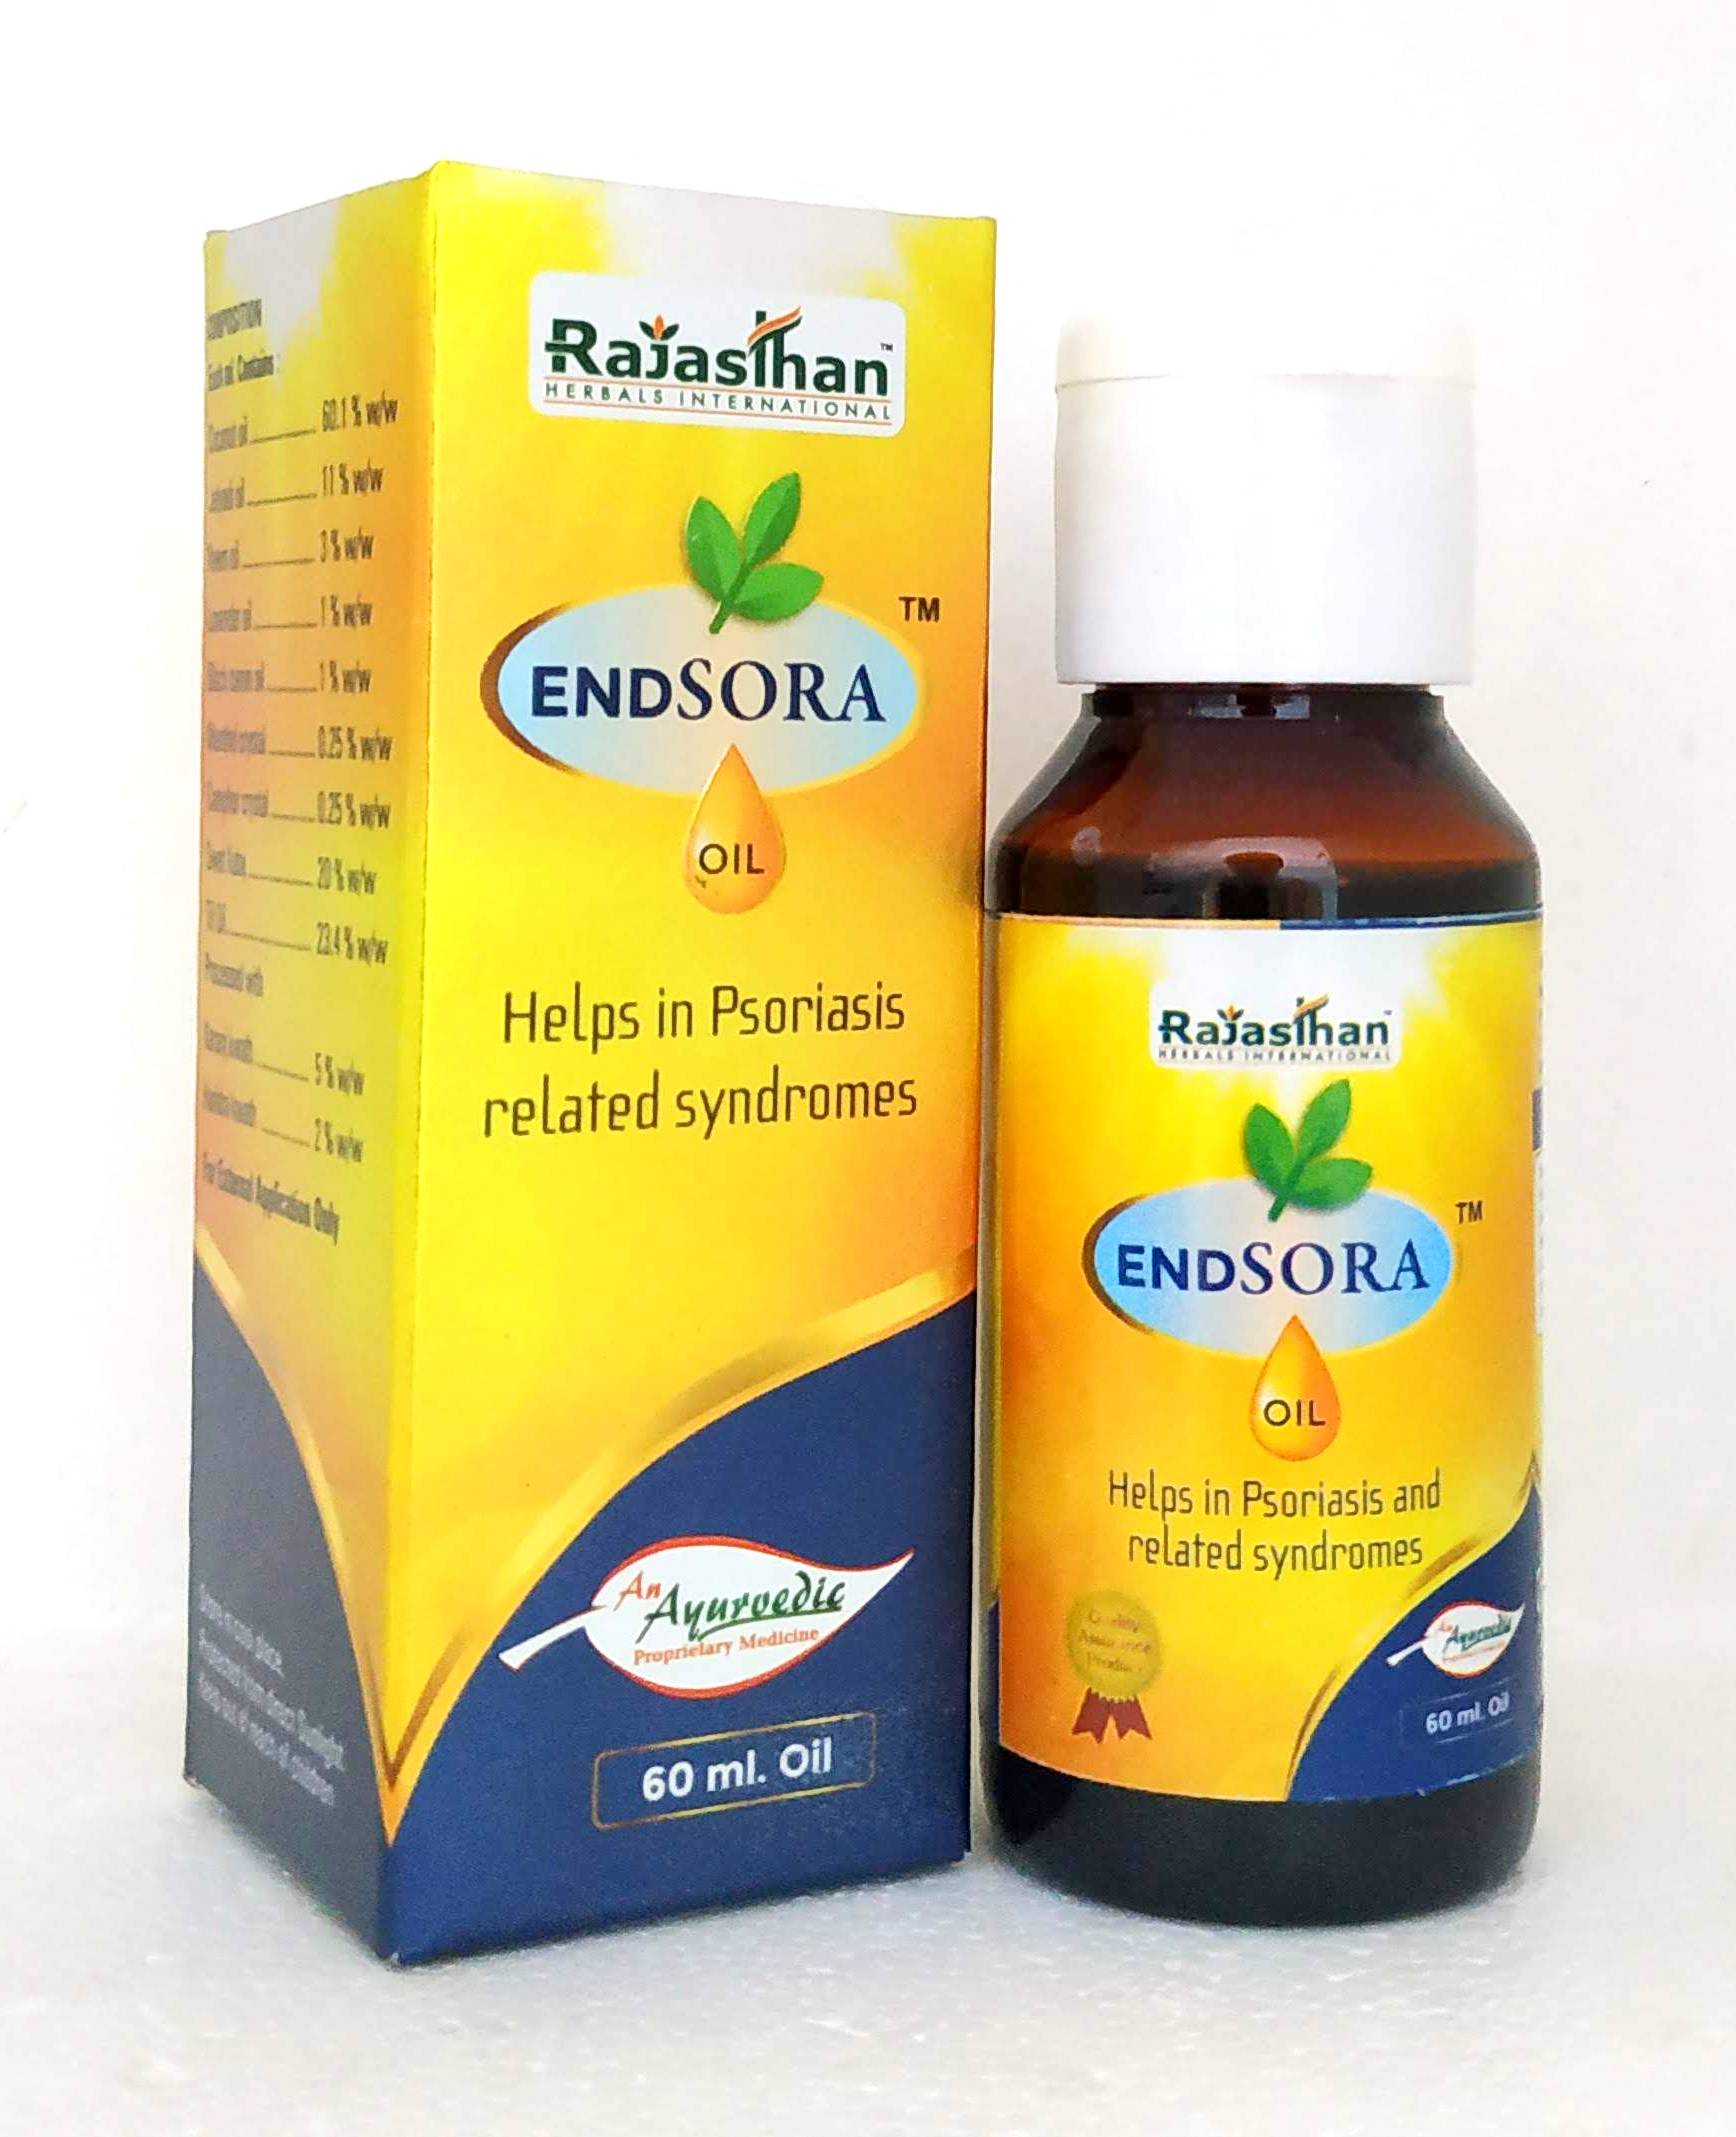 Shop Endsora Oil 60ml at price 392.00 from Rajasthan Herbals Online - Ayush Care